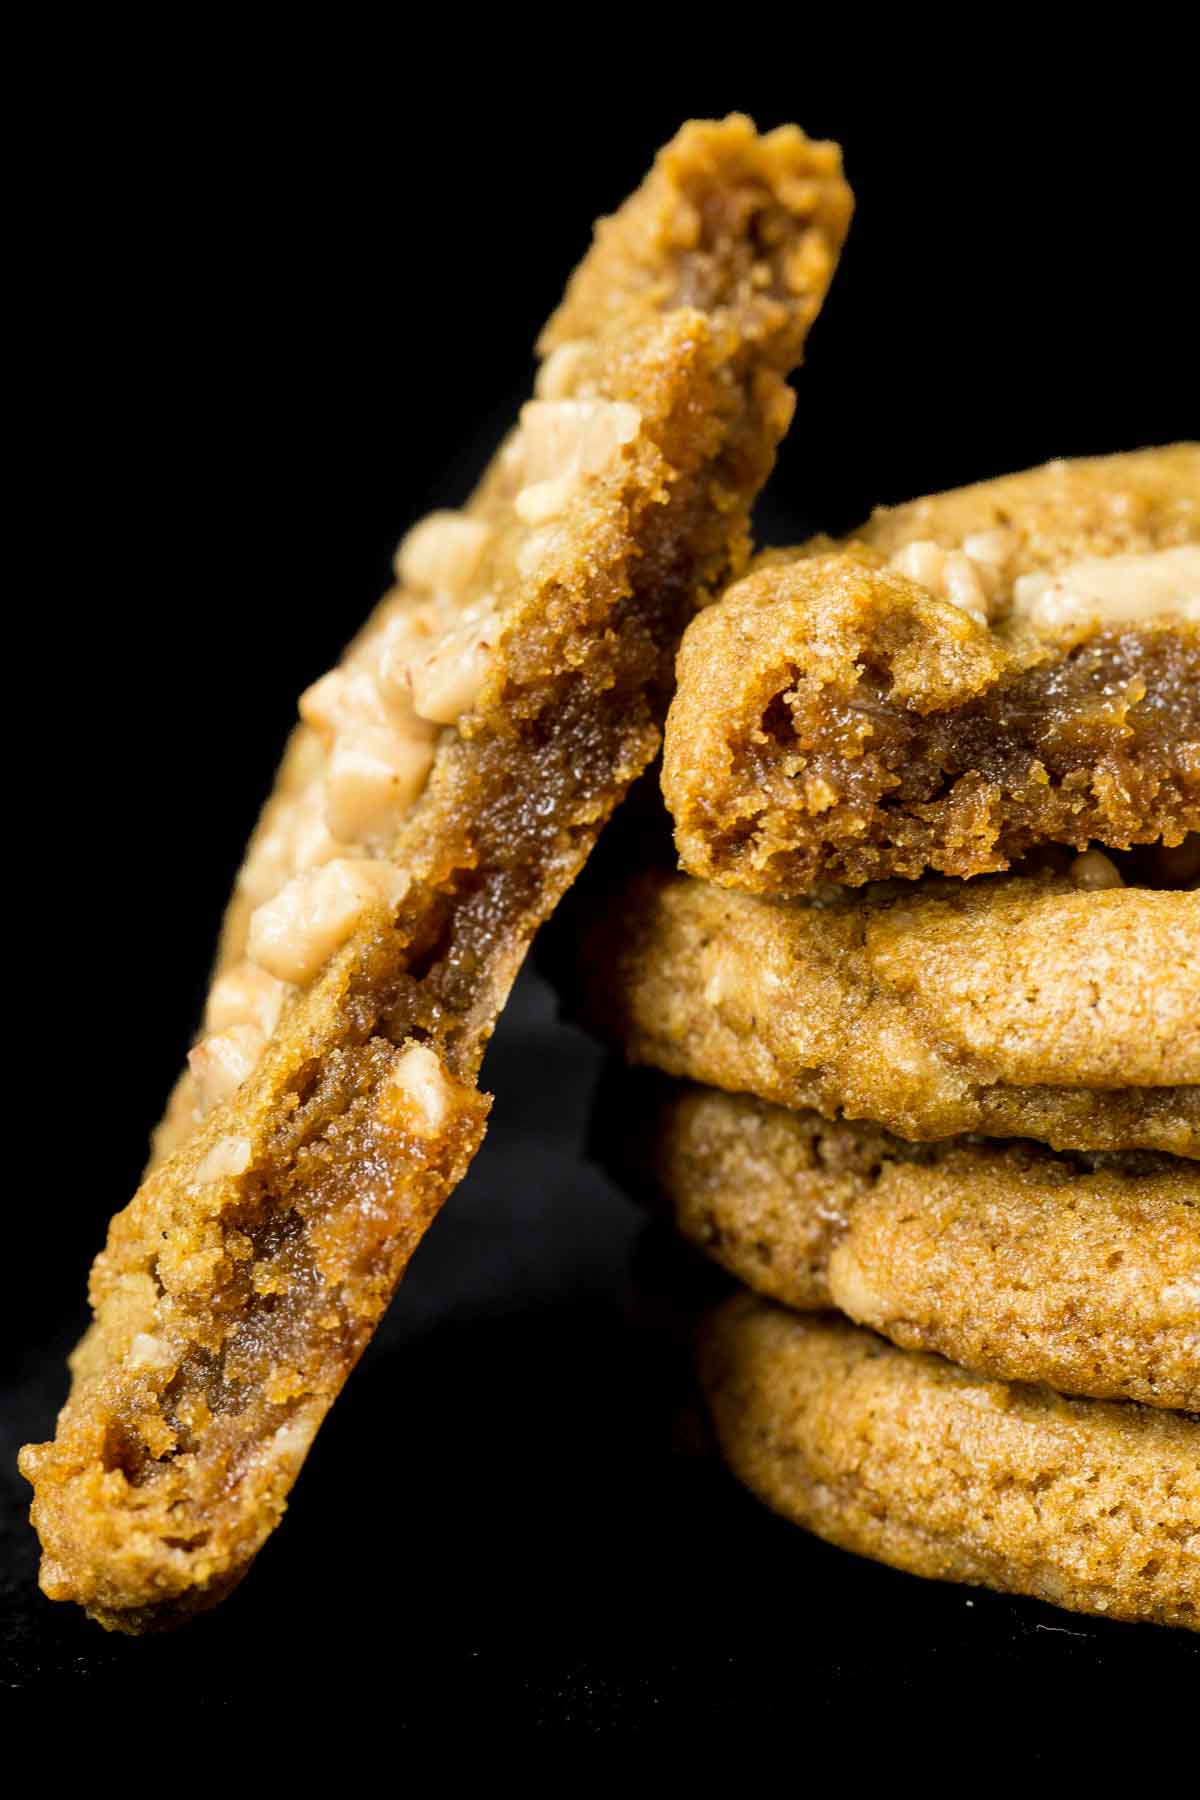 Extreme closeup photo of the inside of a Crispy, Chewy Toffee Pumpkin Cookie.